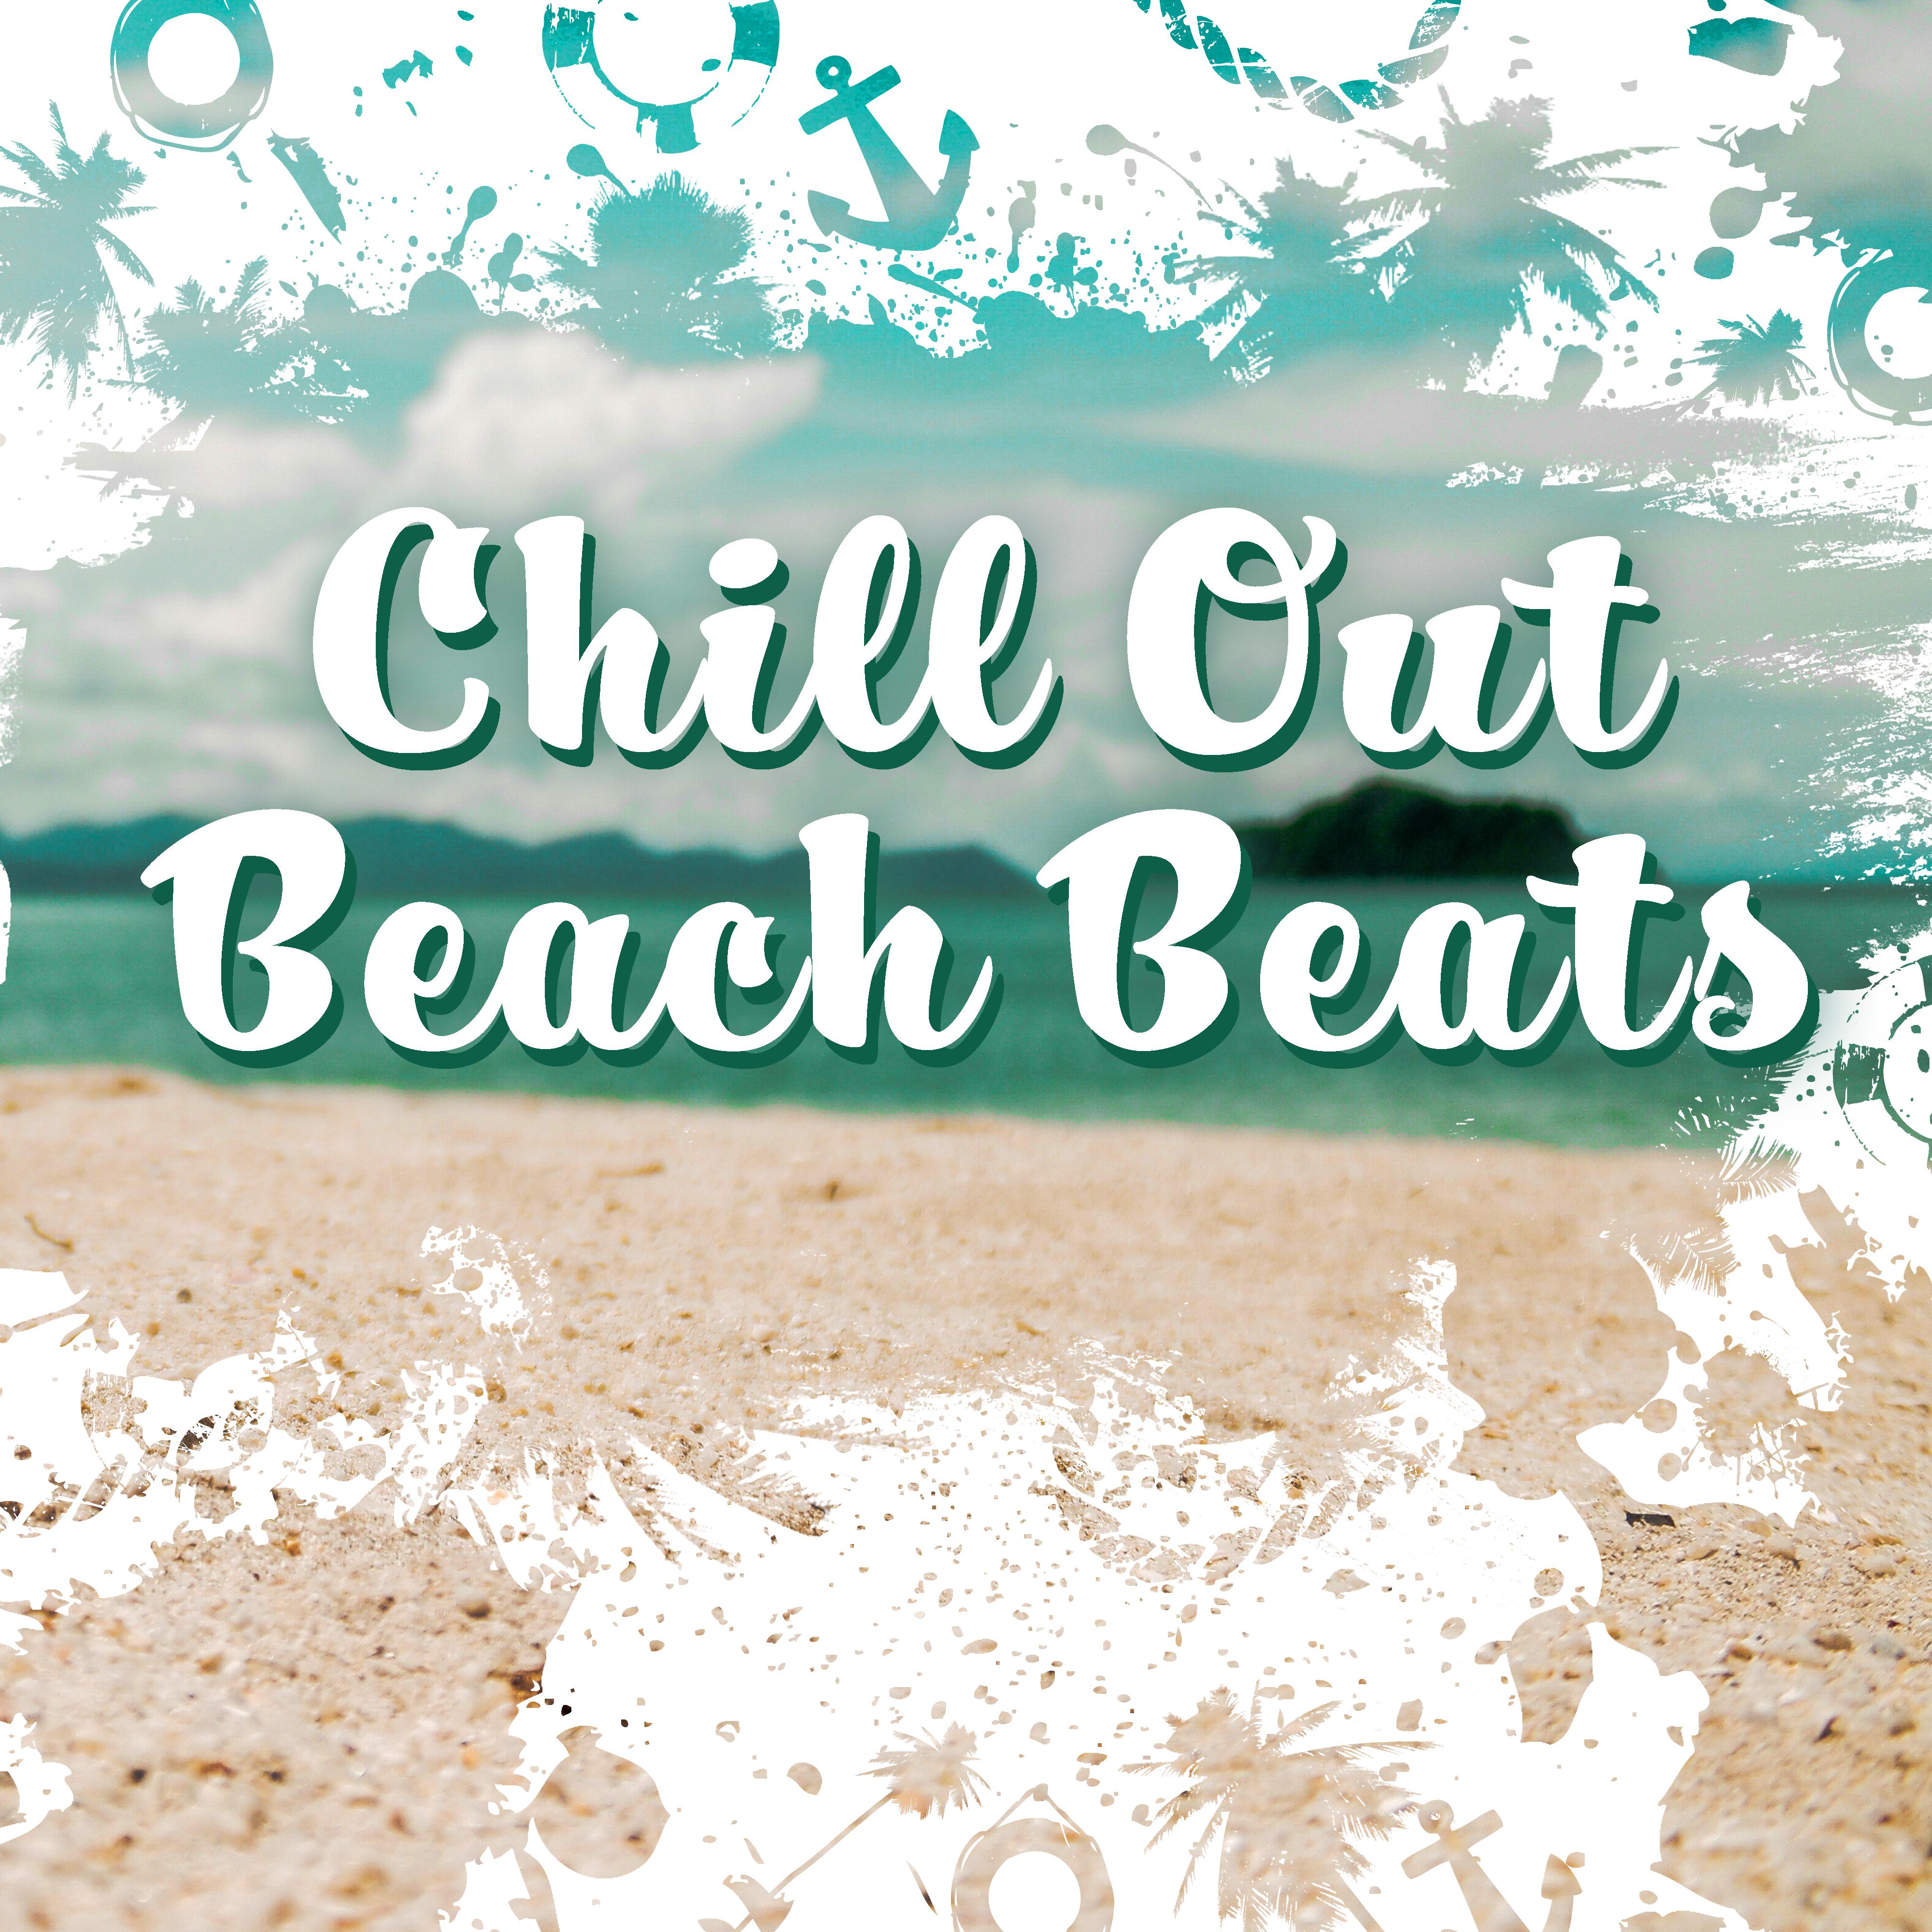 Chill Out Beach Beats – Summer Relaxing Melodies, Stress Relief, Peaceful Music, Time to Rest, 2017 Chill Out Music